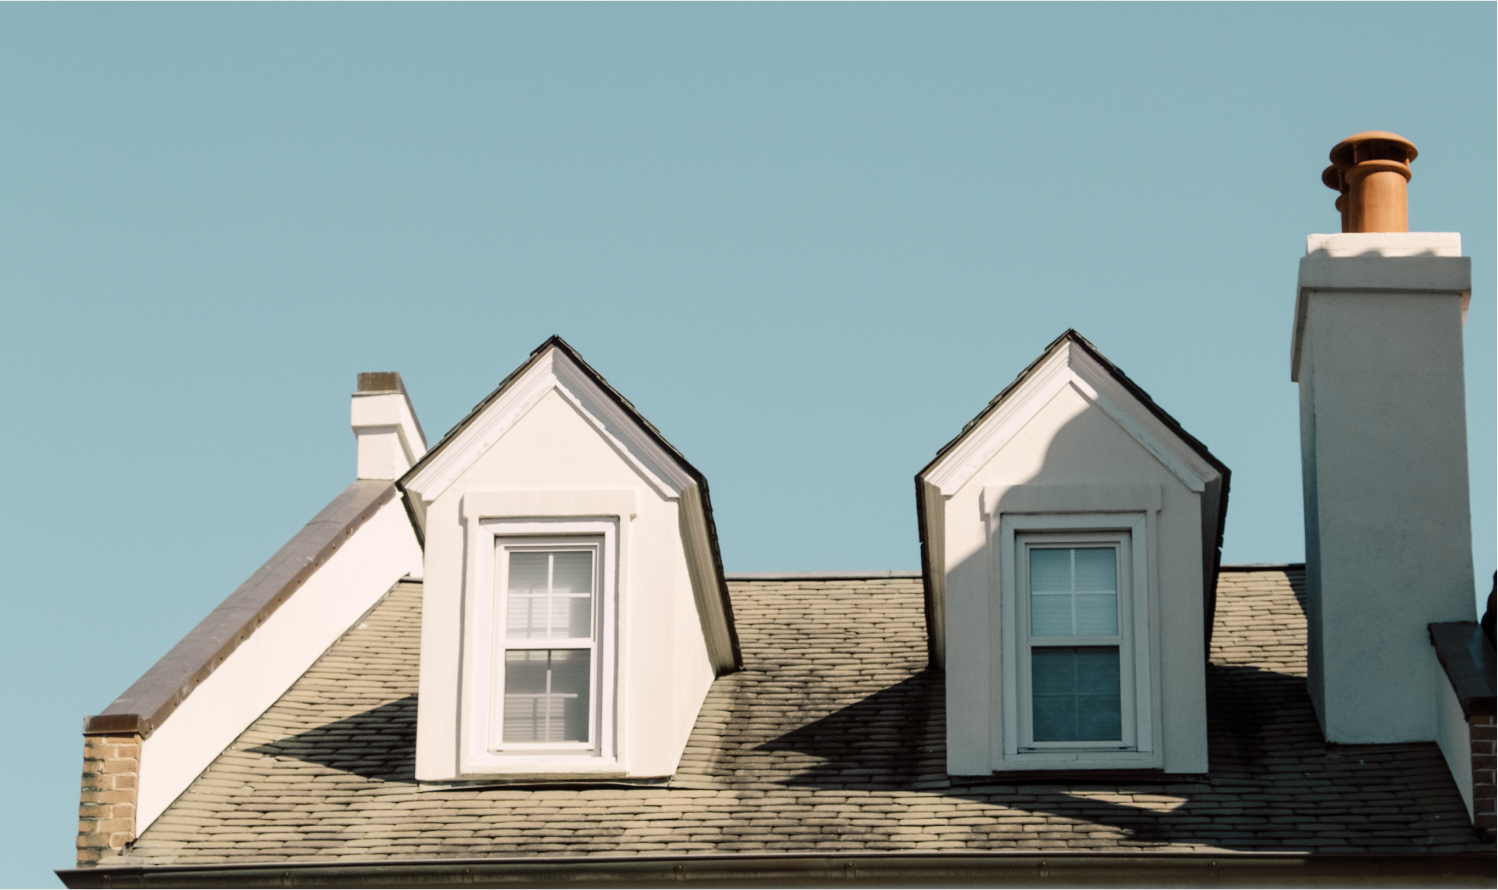 Roof of house with two dormer windows and a chimney.